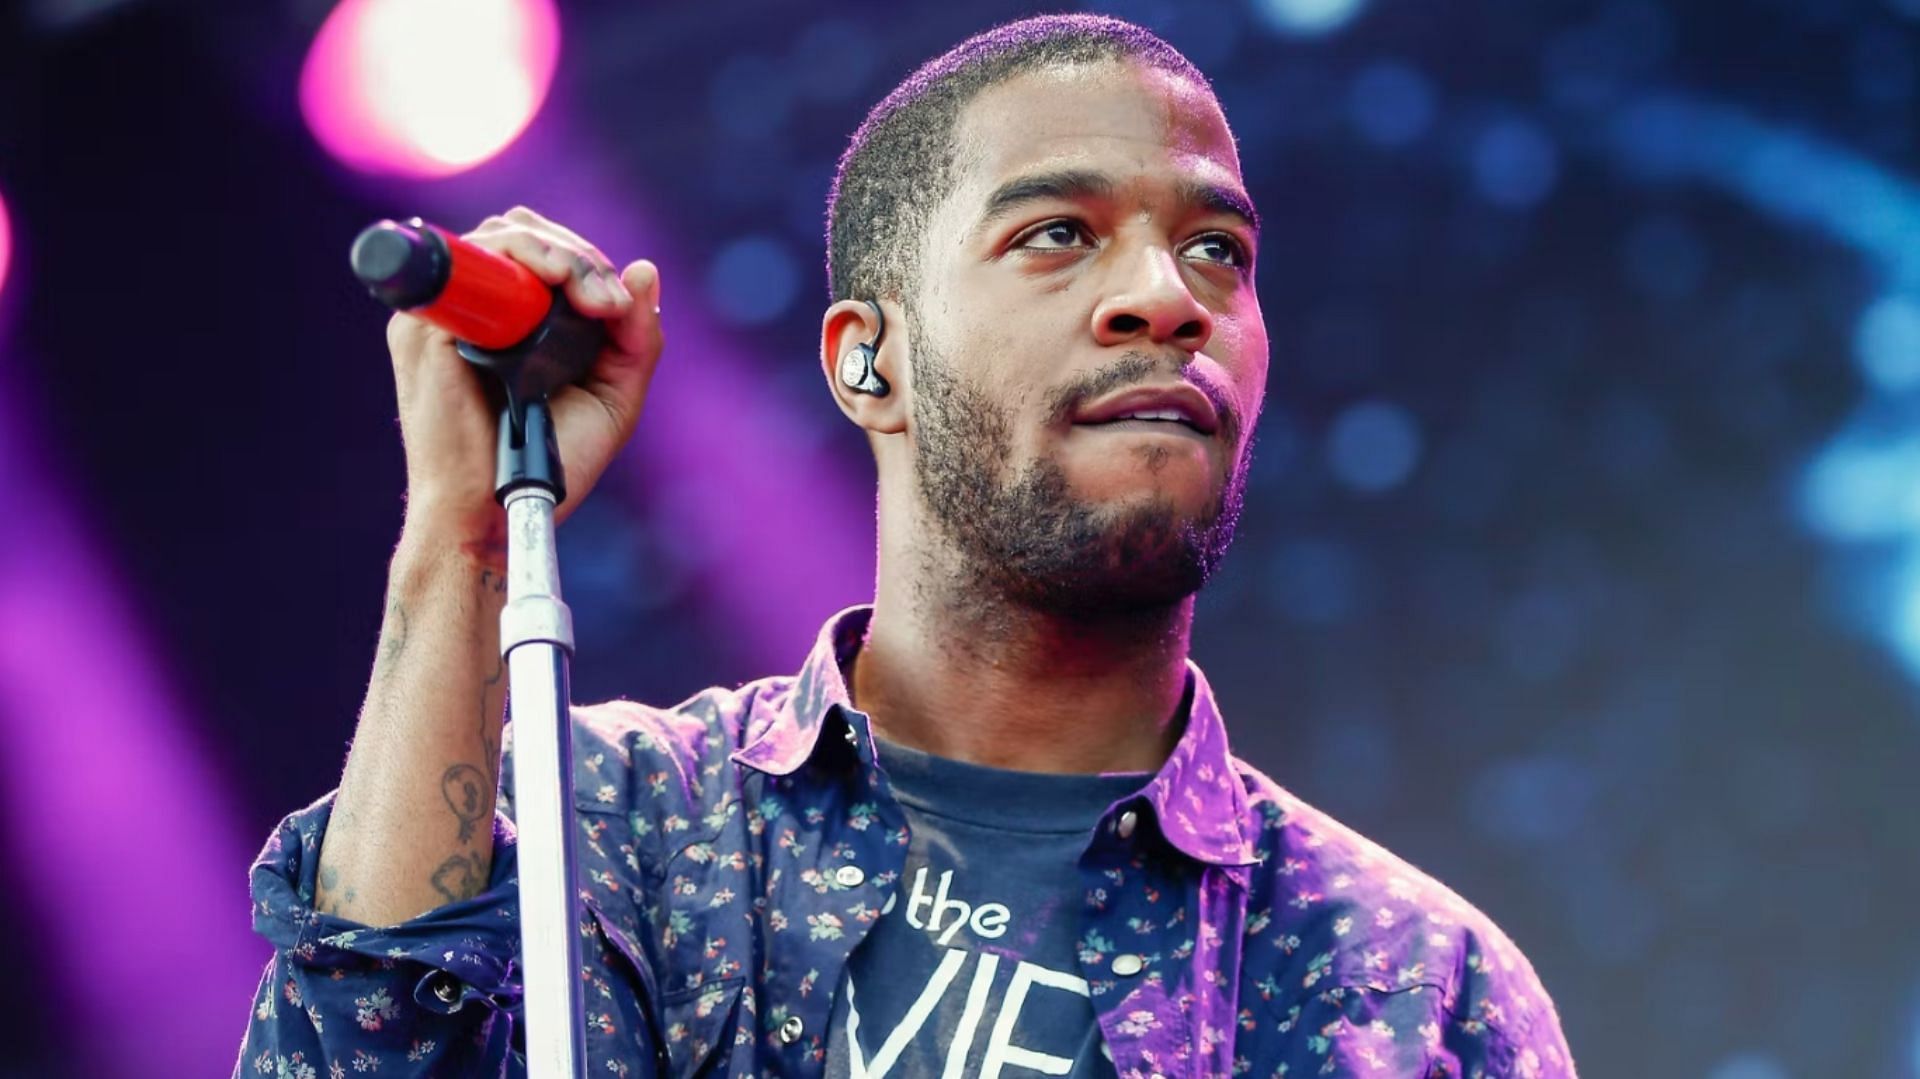 Items were thrown at Kid Cudi during his Rolling Loud Miami set. (Image via Getty)